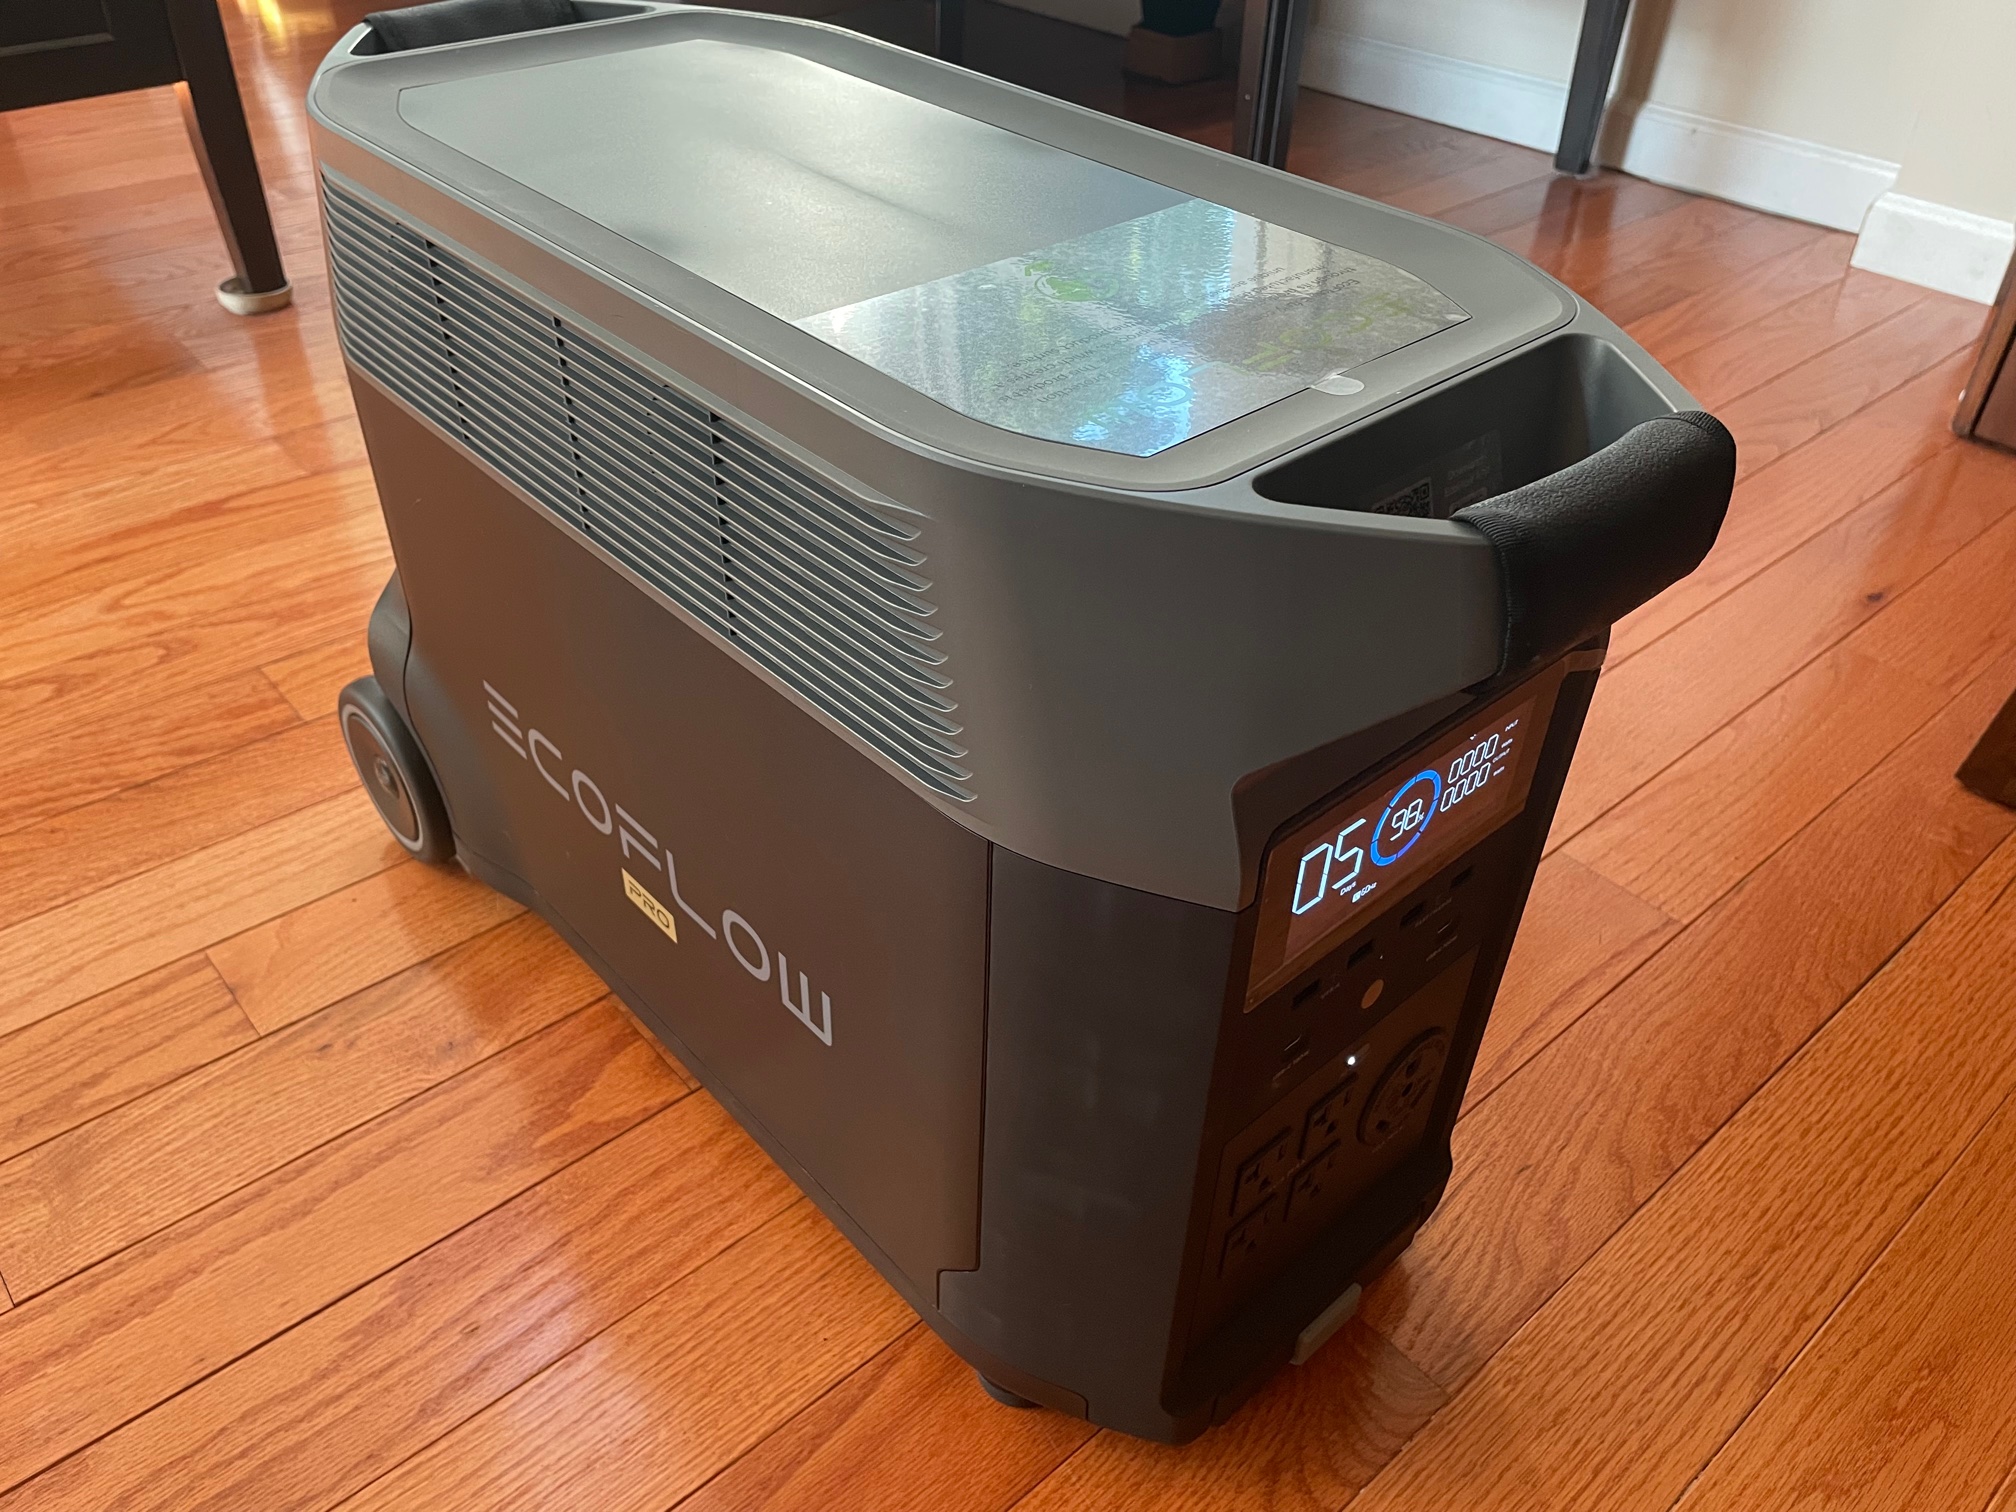 EcoFlow Delta Pro portable power station review - Better than a